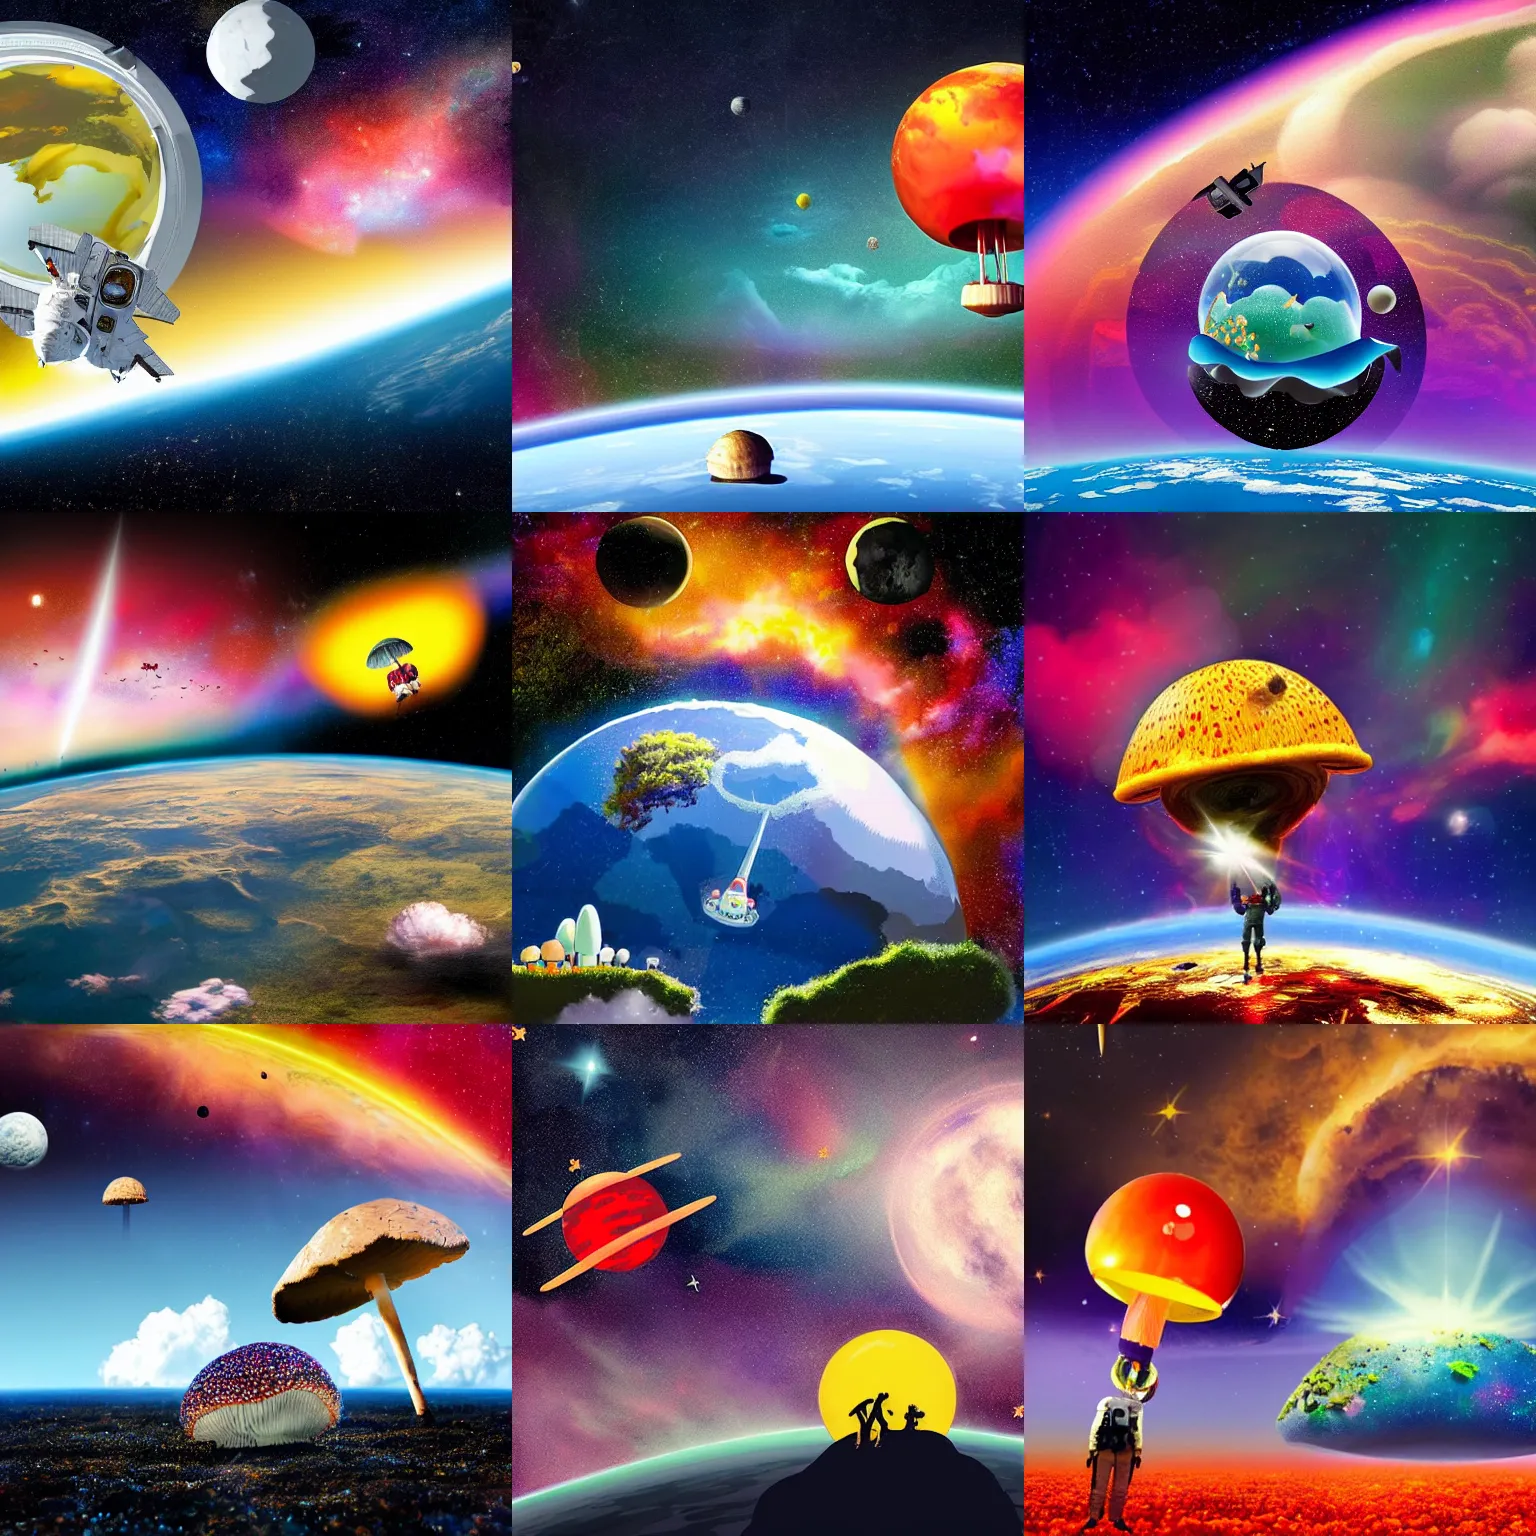 Prompt: a flying island in space, an astronaut standing on the island ramming a flyagaric in the ground, stars and planet earth in the background surrounded by colorful clouds